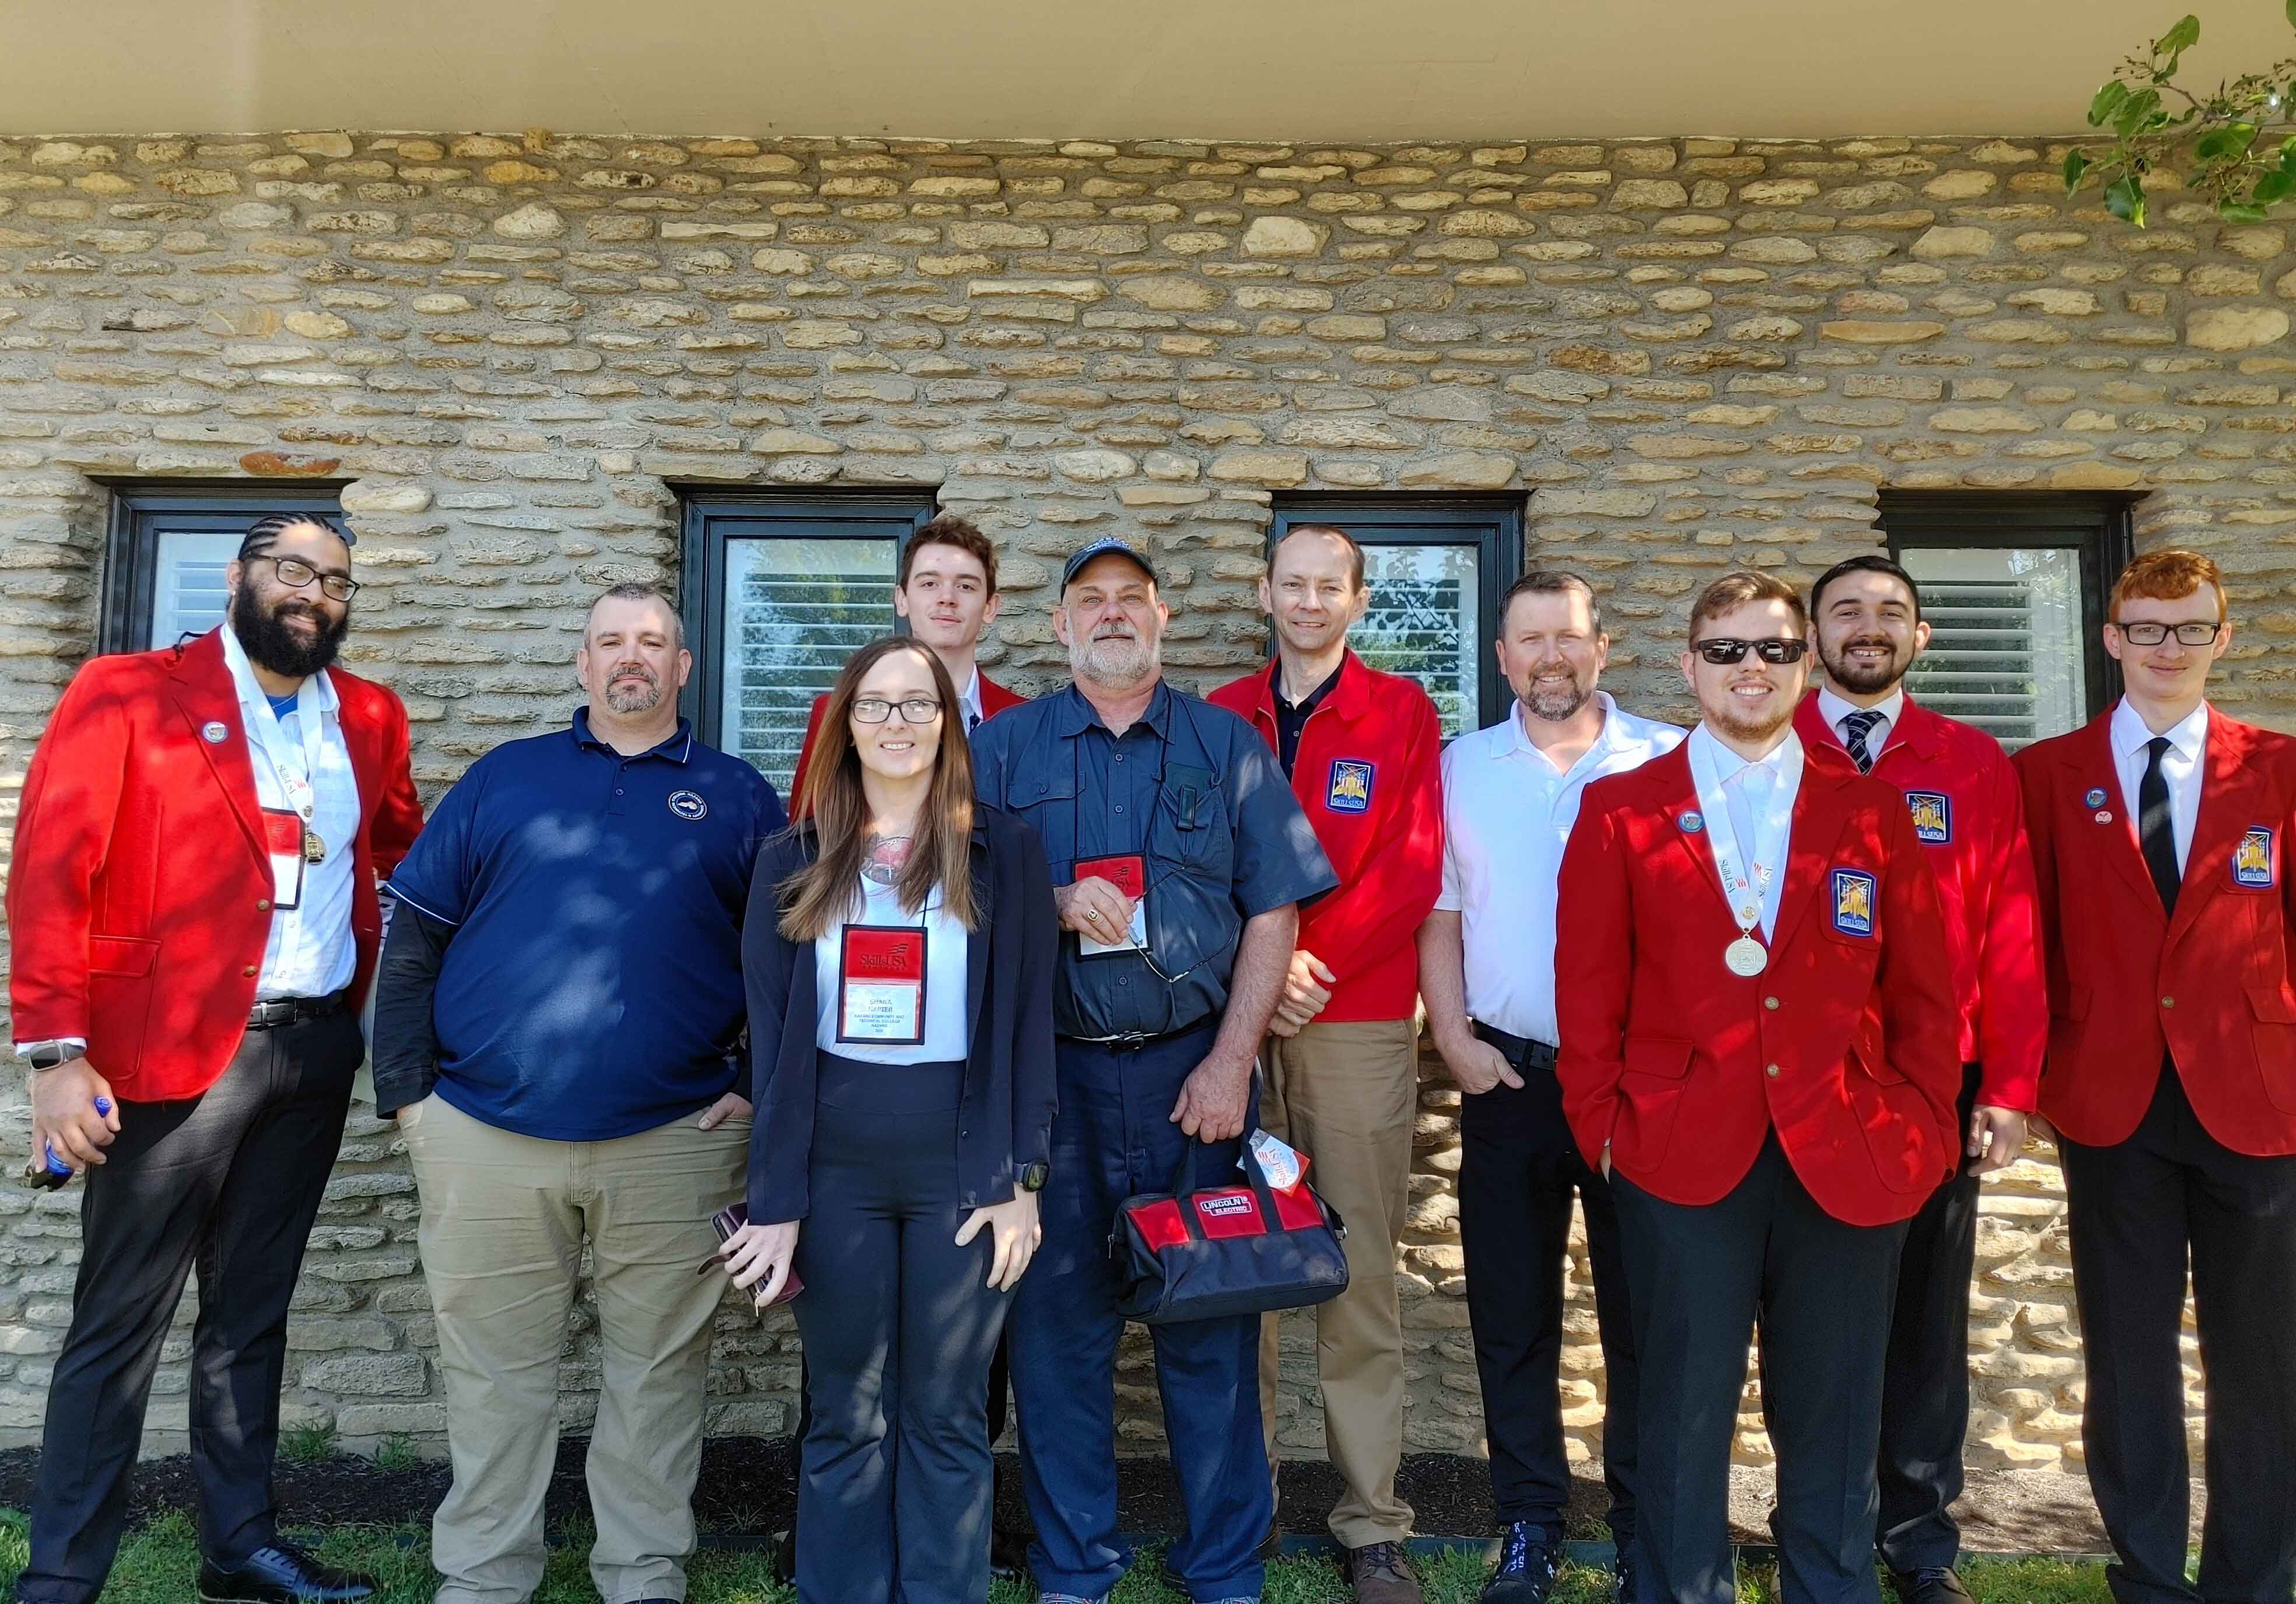 Hazard Community & Technical College (HCTC) SkillsUSA students attended the Kentucky SkillsUSA Leadership and Skills Conference from April 17-20.  From left to right: *Michael Salvador, Nathan Walker, Shana Napier, *Hayden Ison, Randy Bowling, Tony Back, Joseph Phillips, *James Hall, David Gray and *Jesse Stamper.  * denotes a student.